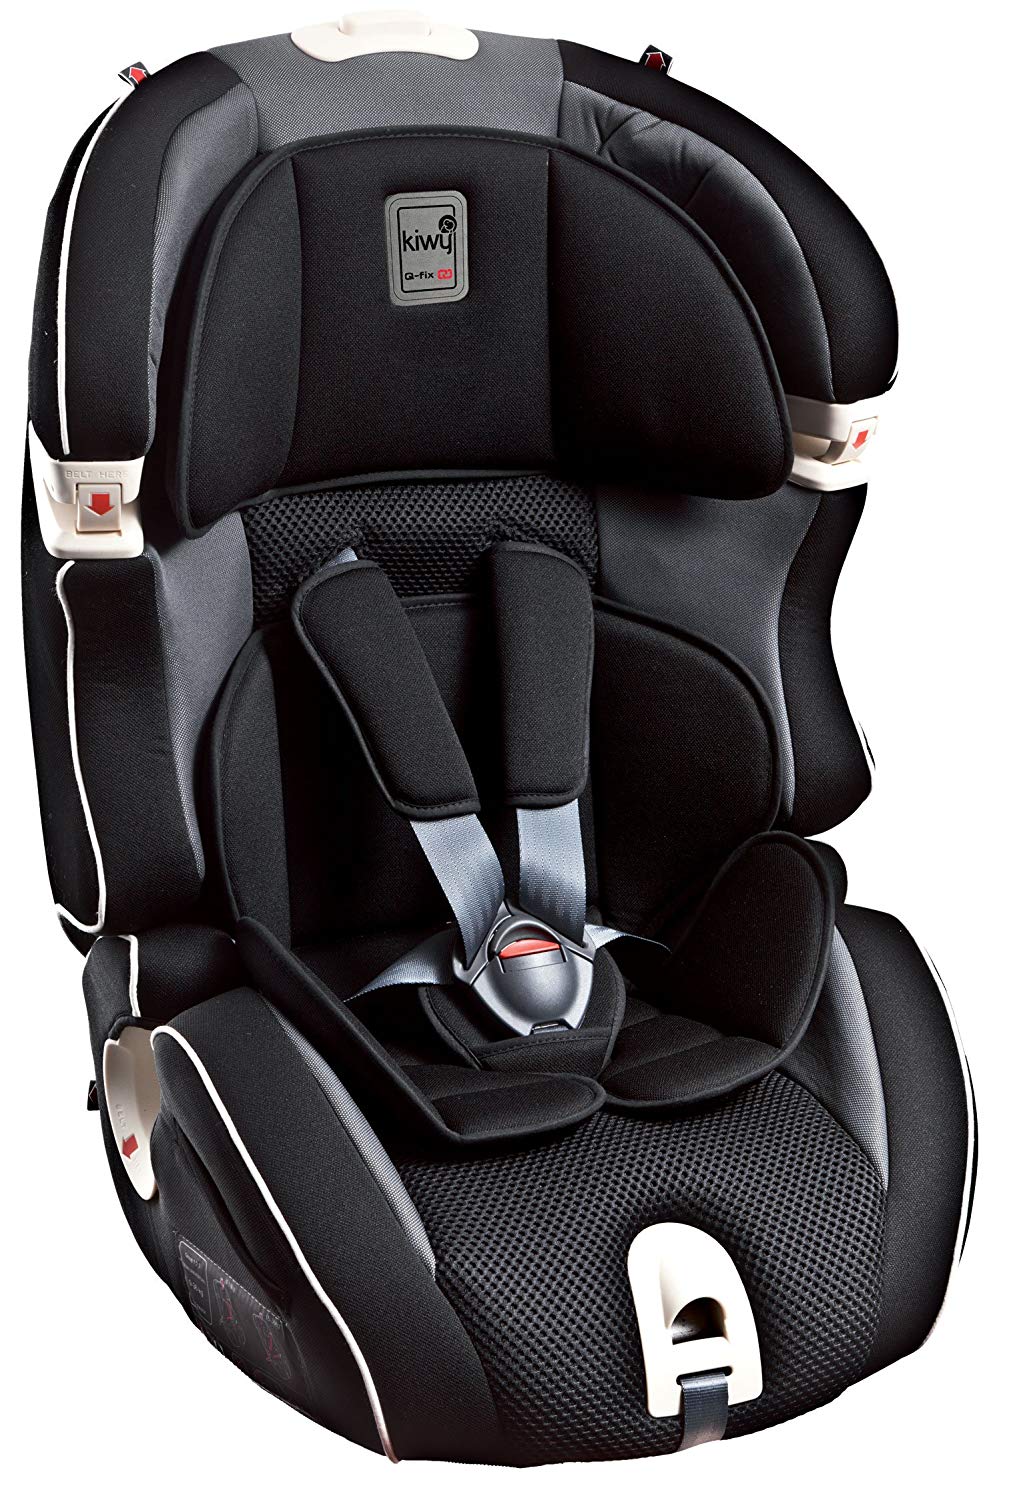 Kiwy Child Car Seat Group 1/2/3 with Isofix 9-36 kg/Carbon